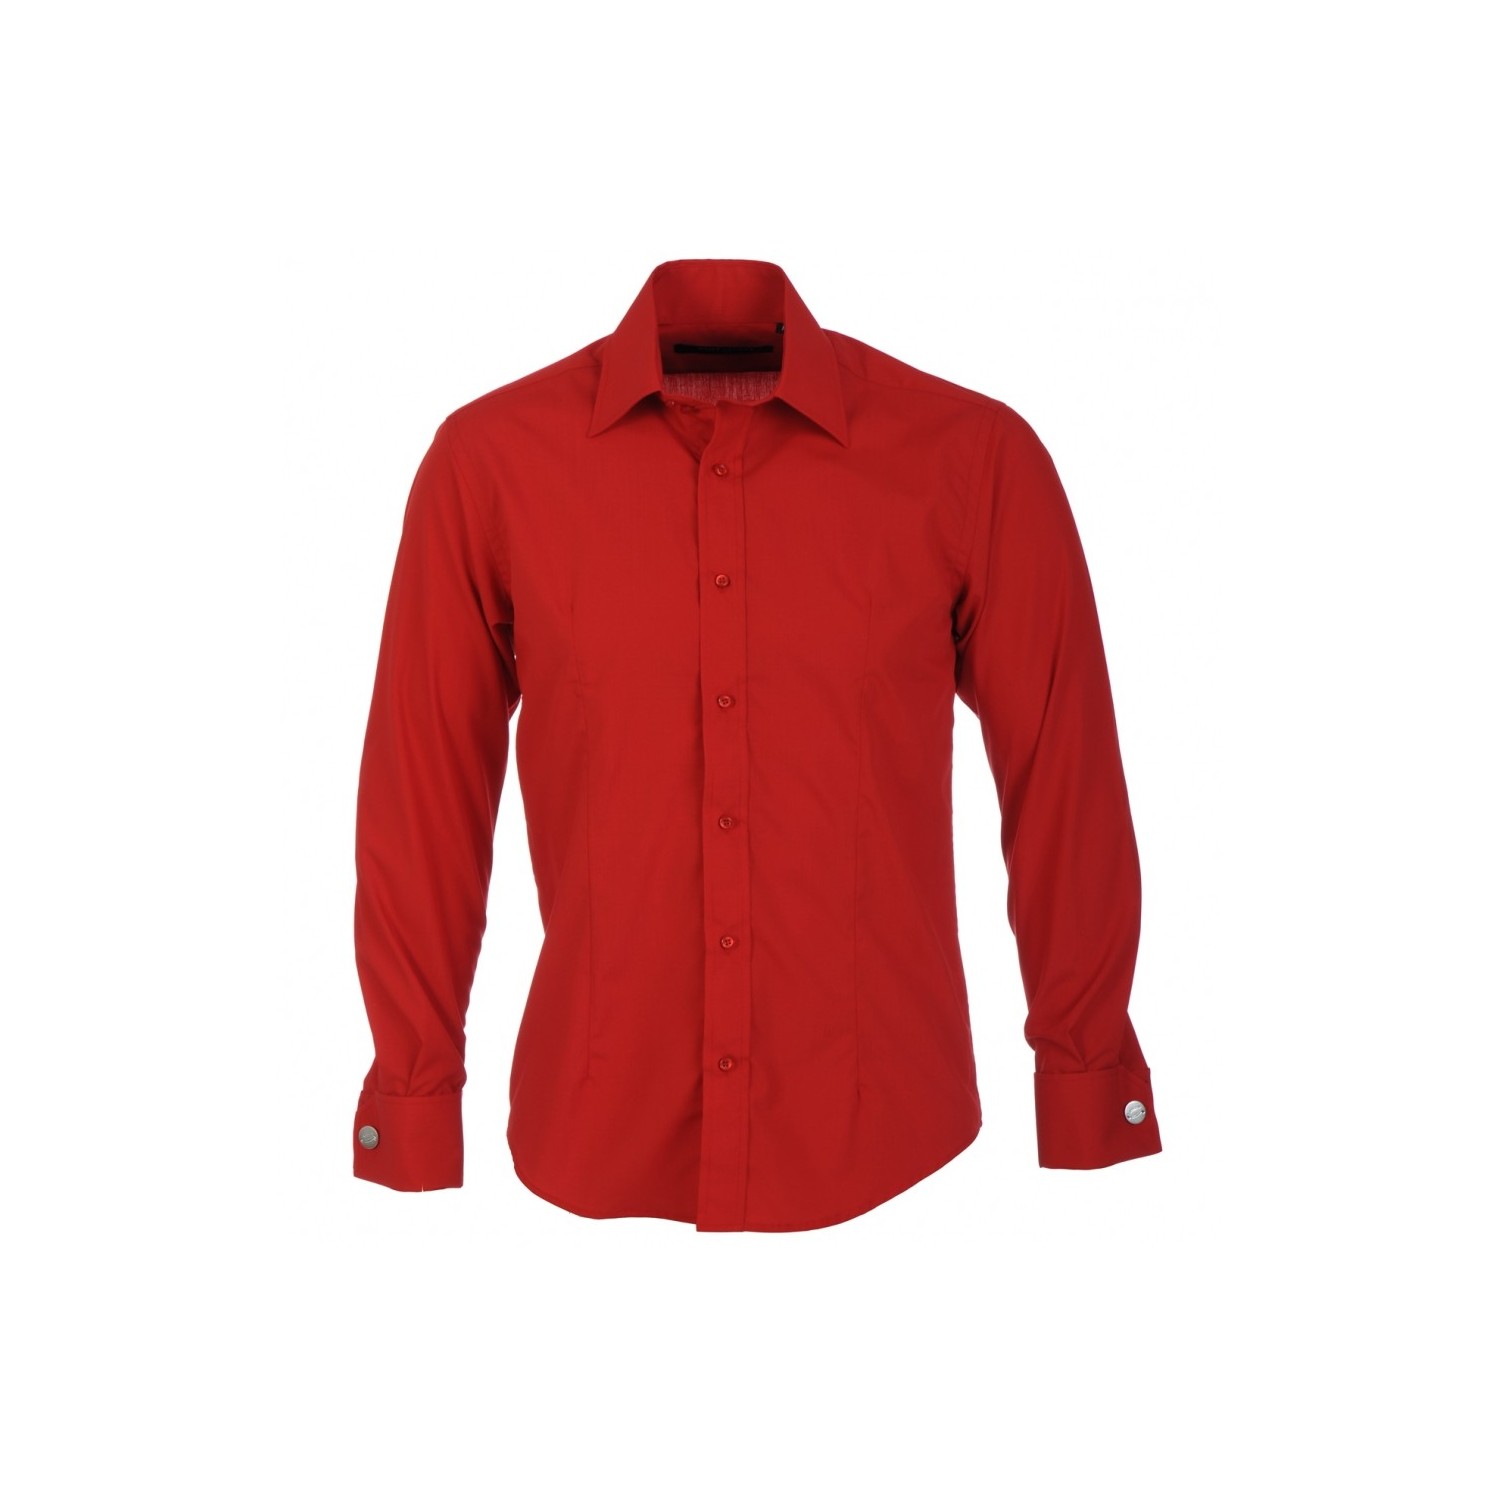 Red Formal Shirt at Best Prices - Shopclues Online Shopping Store